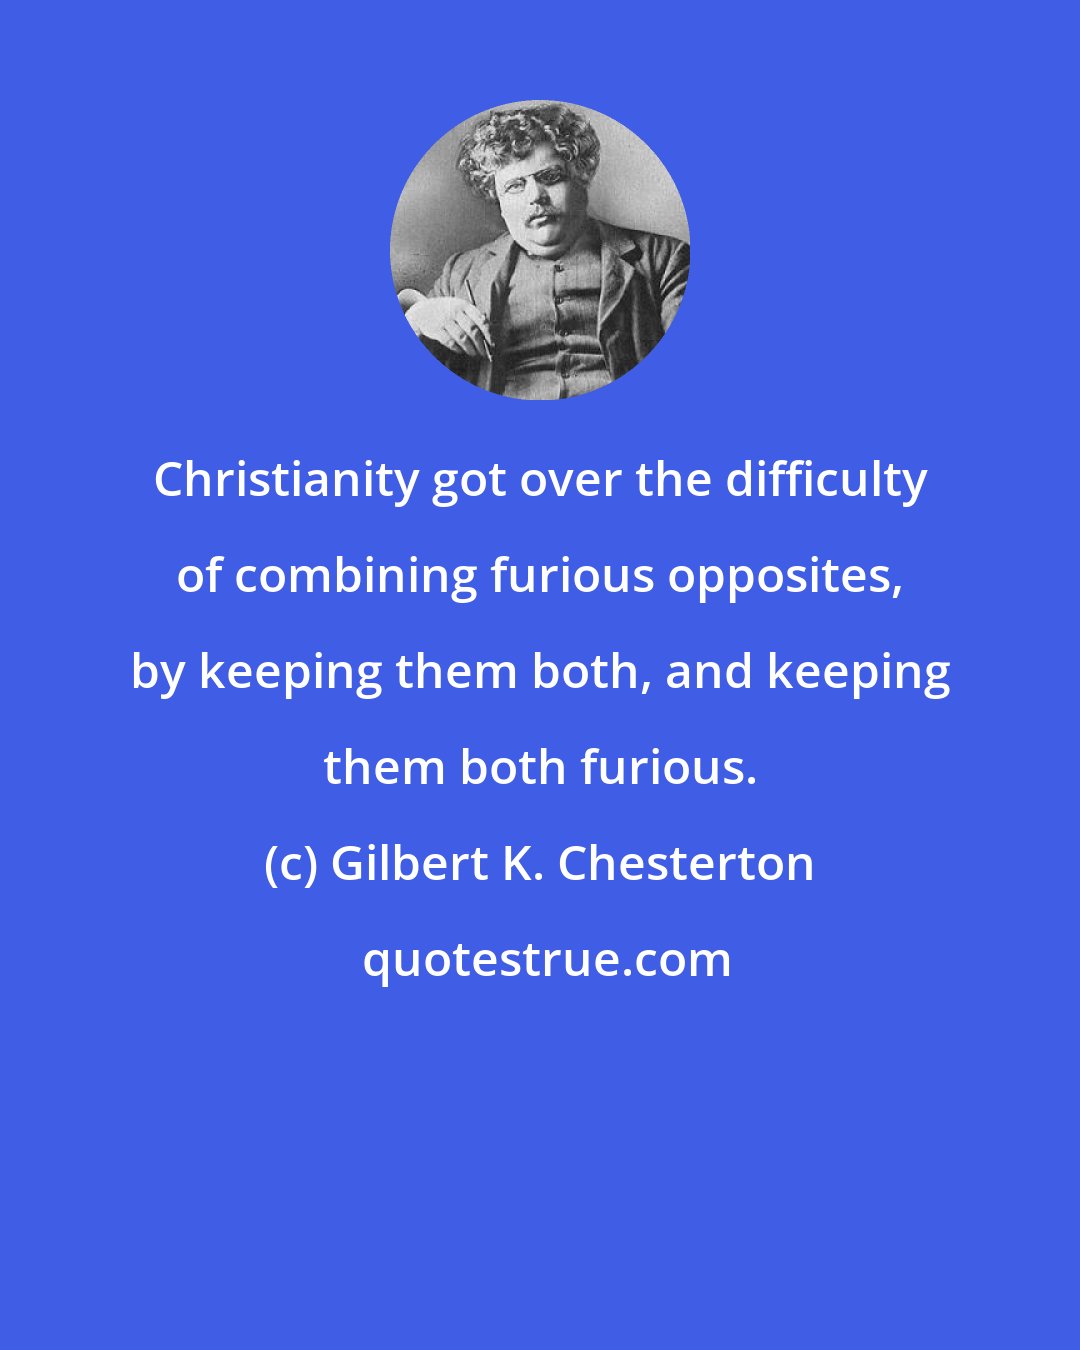 Gilbert K. Chesterton: Christianity got over the difficulty of combining furious opposites, by keeping them both, and keeping them both furious.